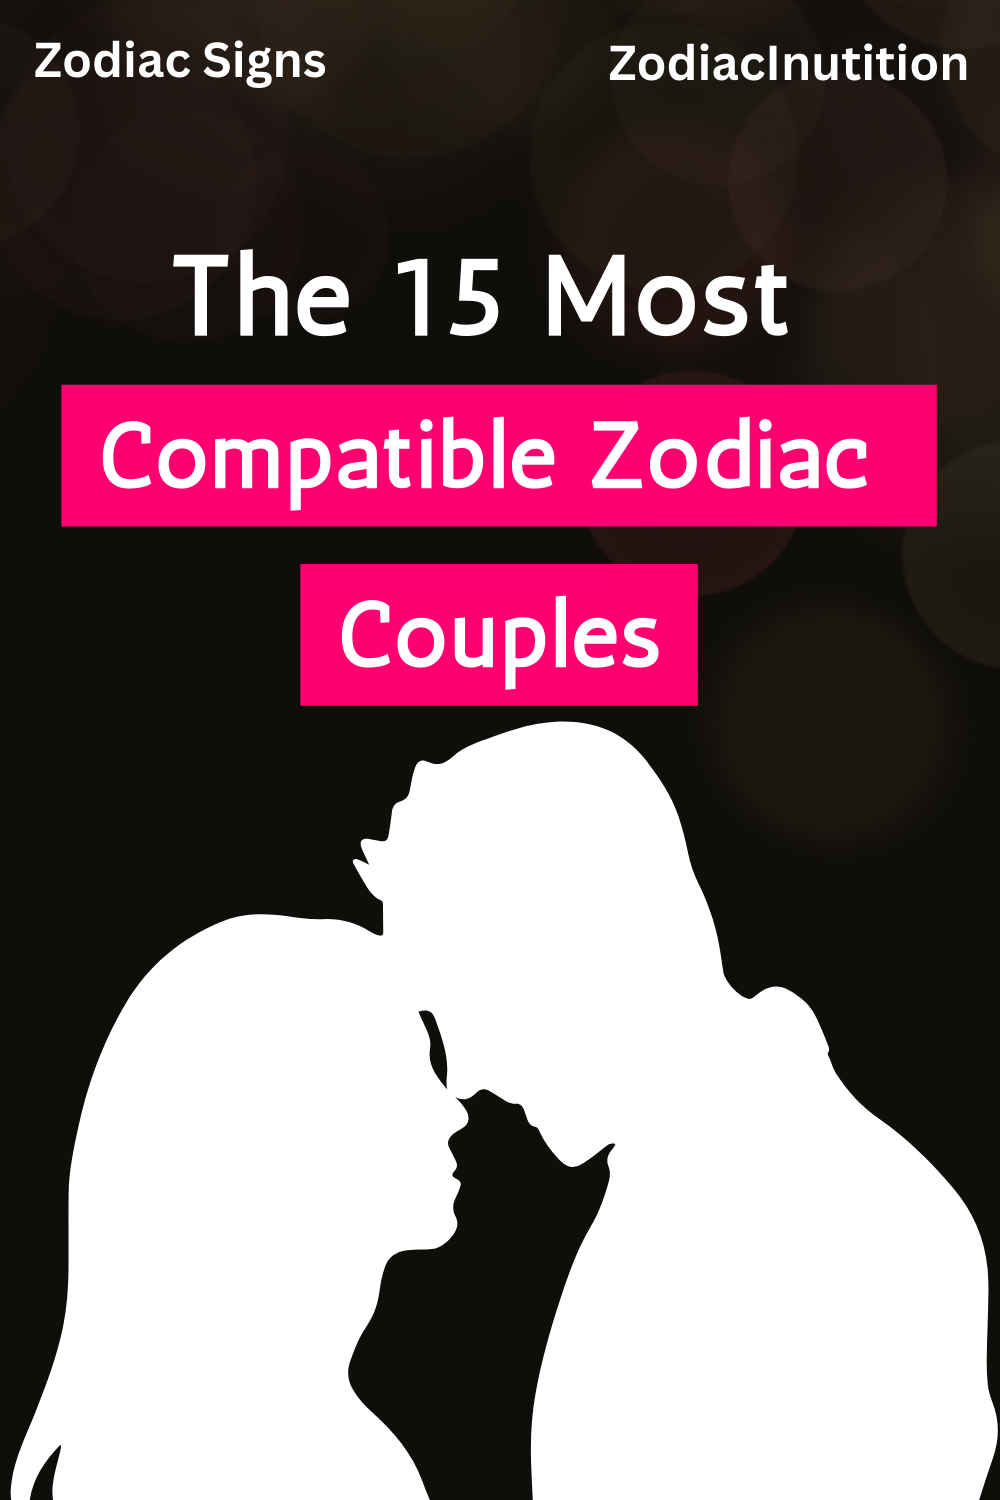 The 15 Most Compatible Zodiac Couples